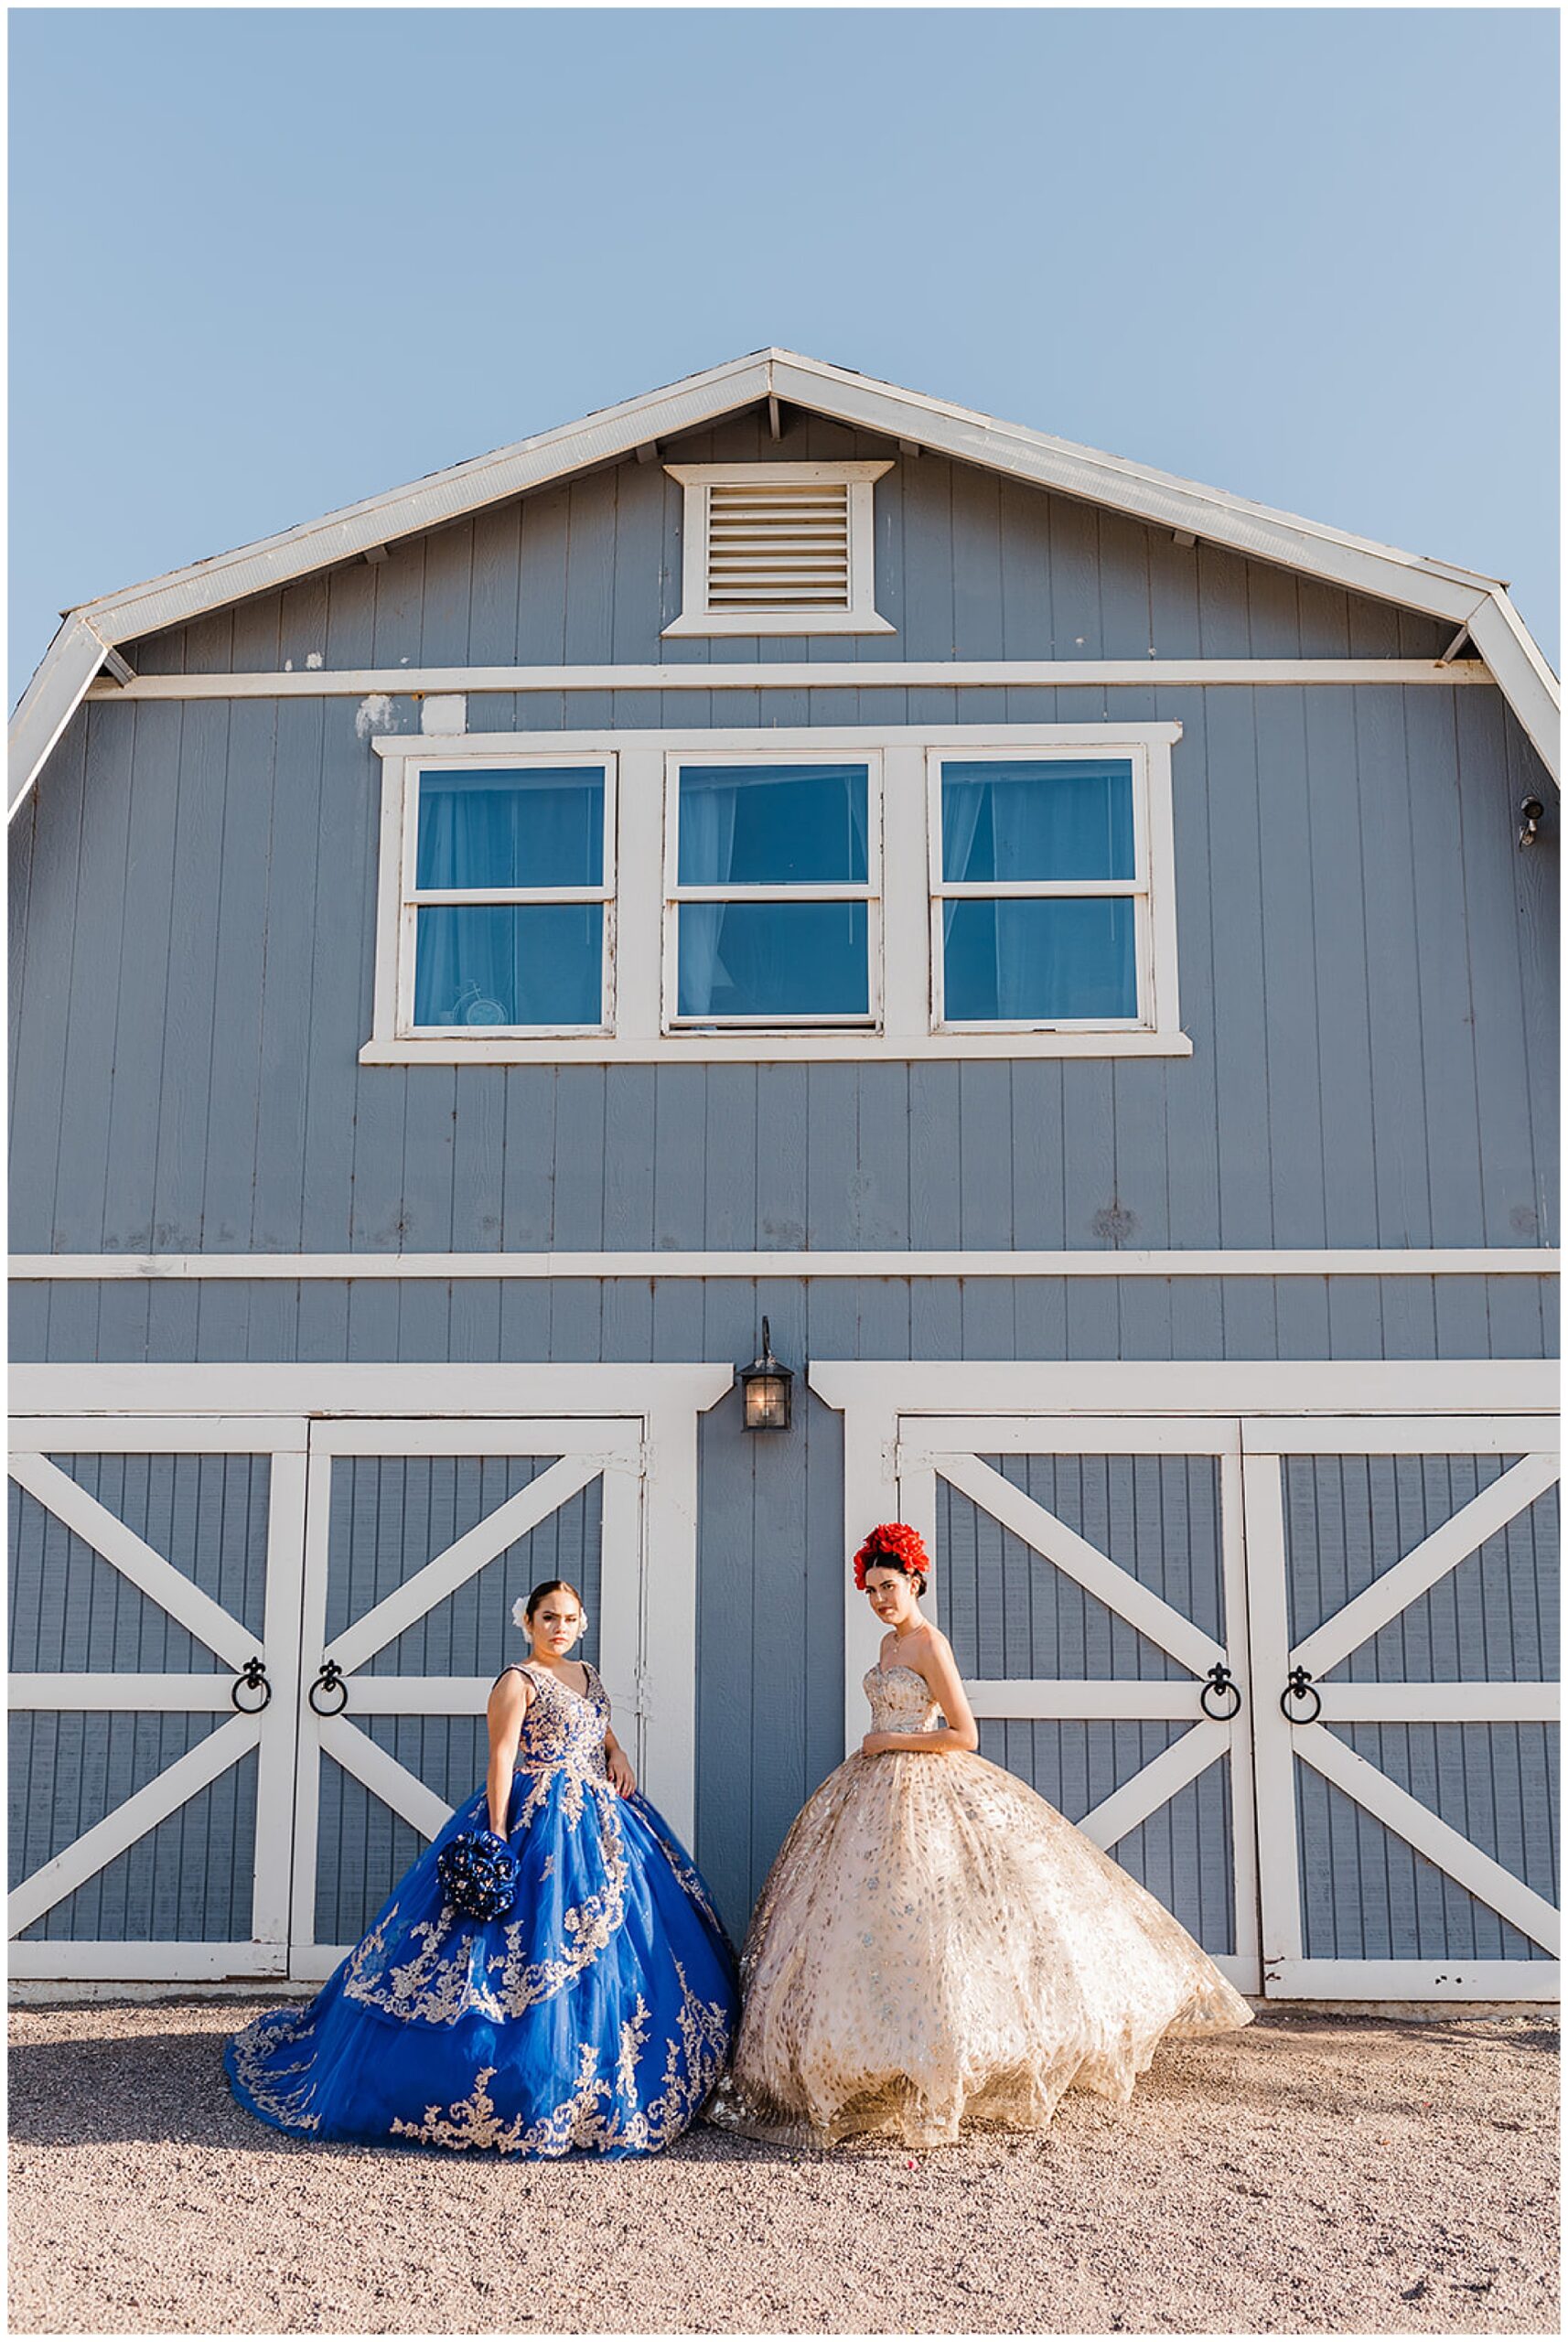 Two teenagers in ornate ball gowns stand in front of a large blue barn Phoenix Quinceaneras dresses